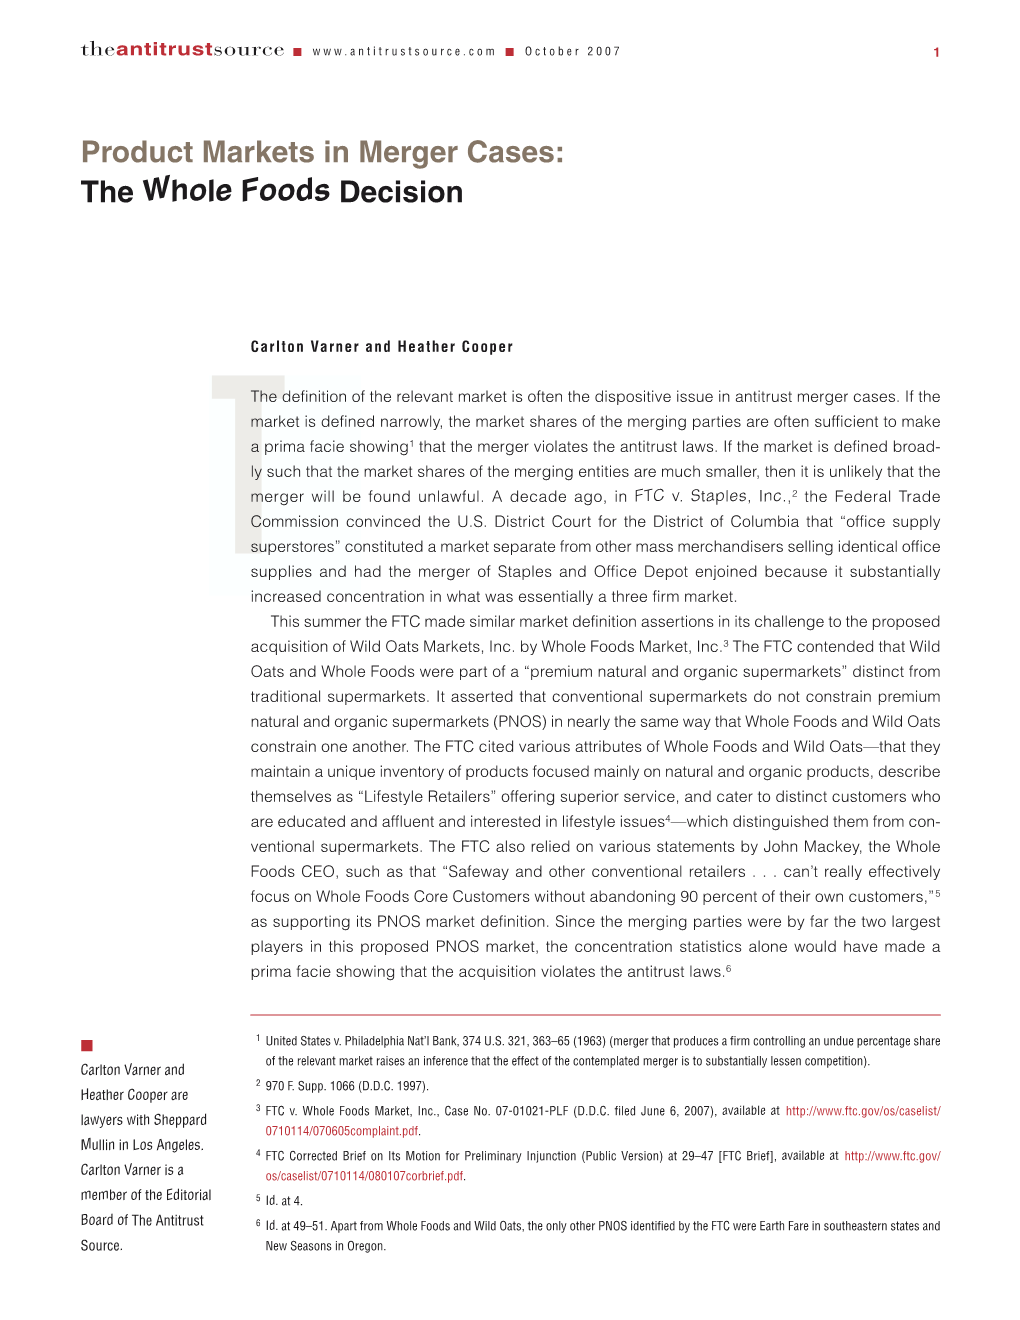 Product Markets in Merger Cases: the Whole Foods Decision